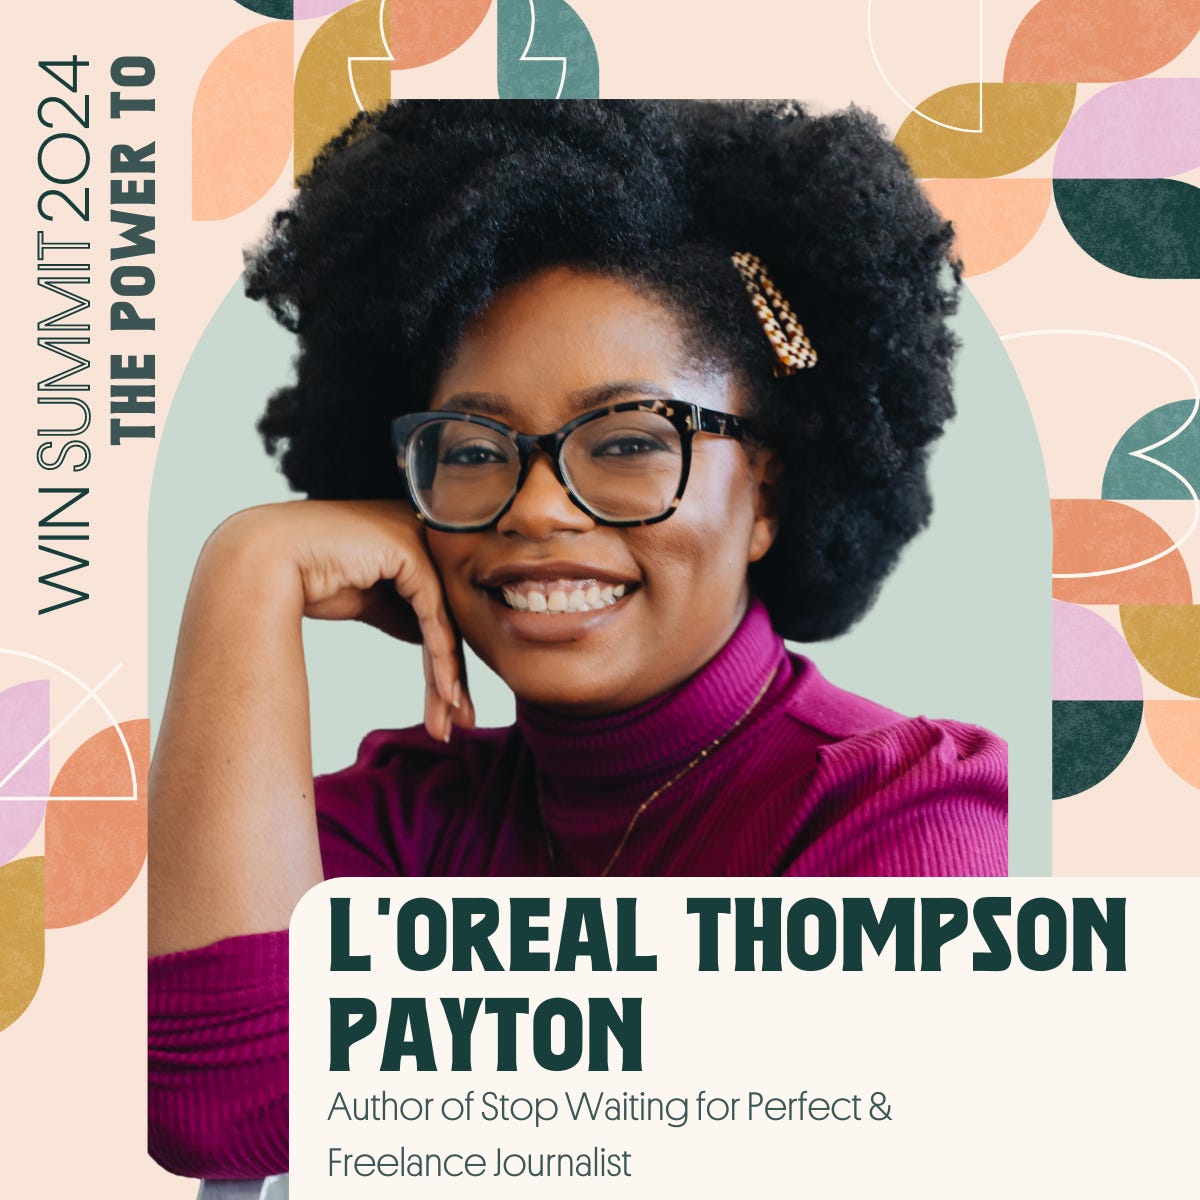 Infographic featuring a picture of author L'Oreal Thompson Payton promoting an upcoming summit